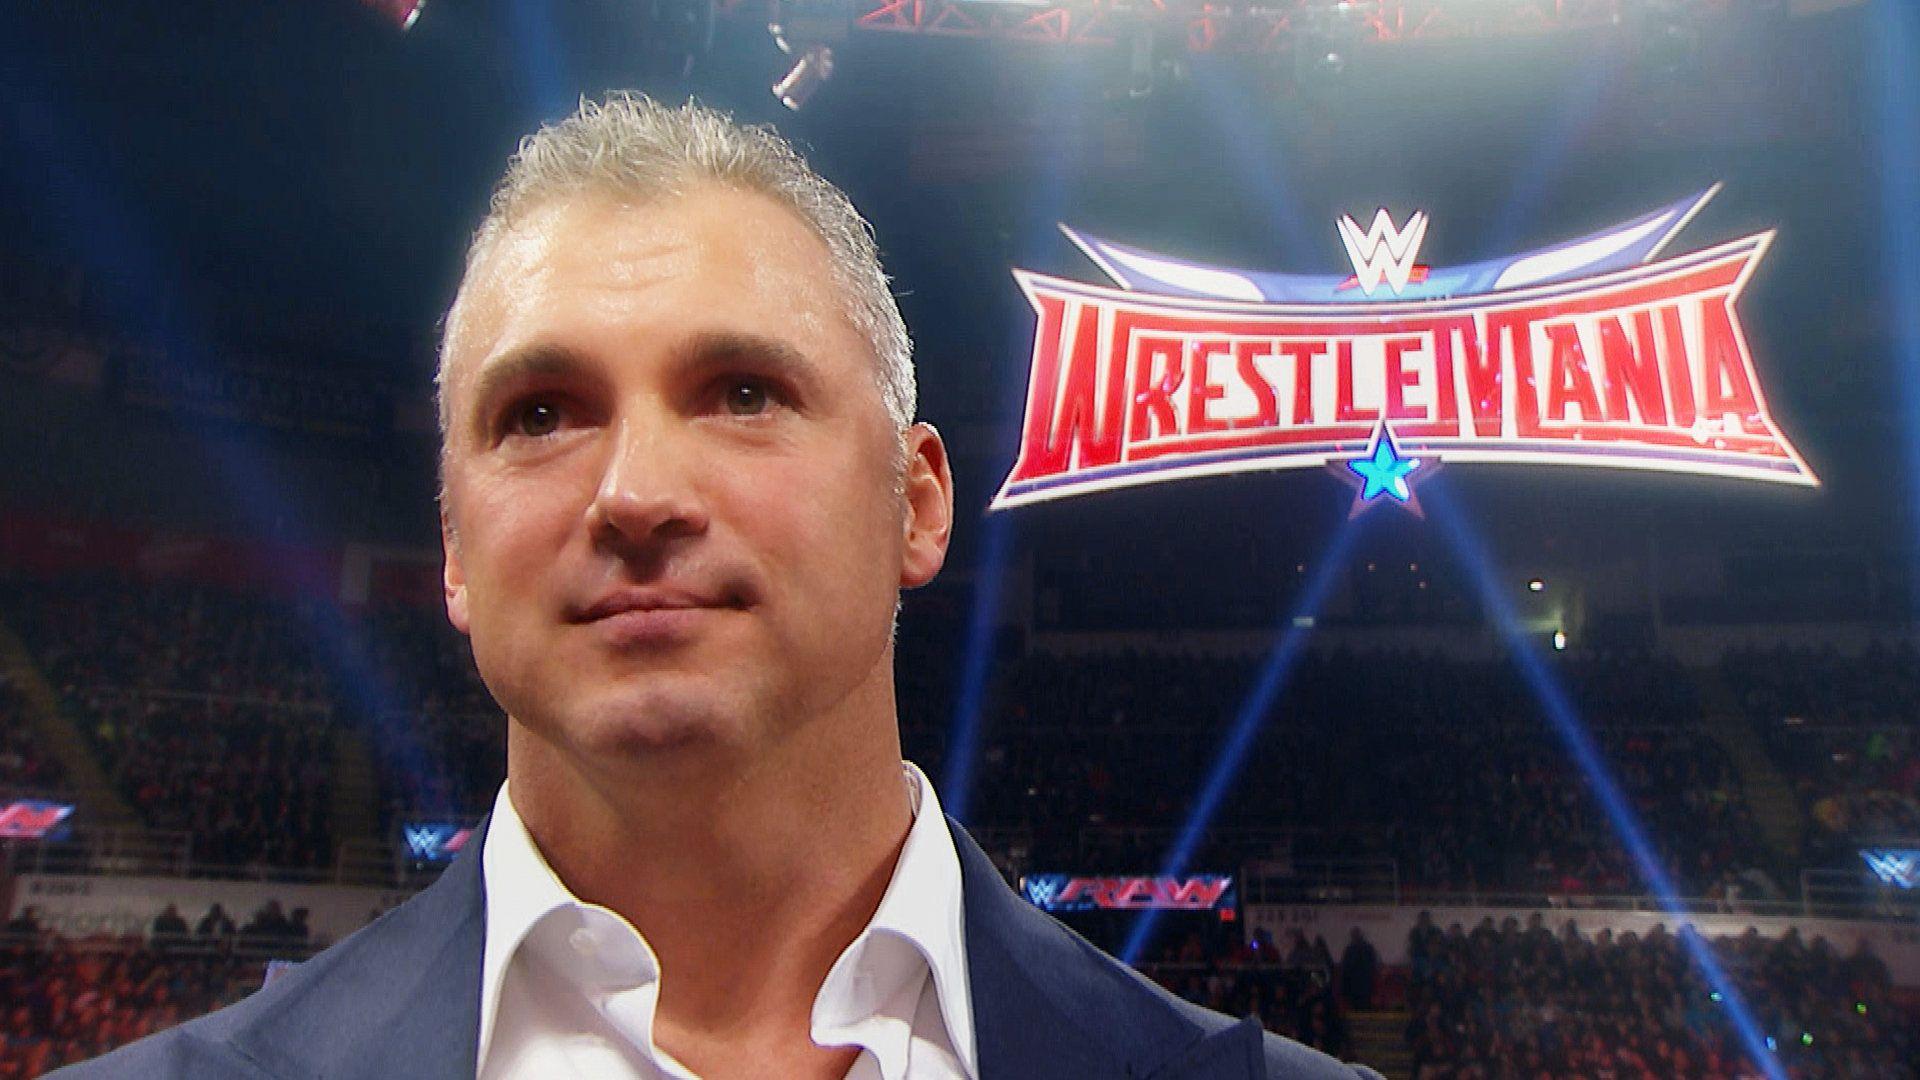 Shane McMahon training with former WBF competitor in preparation